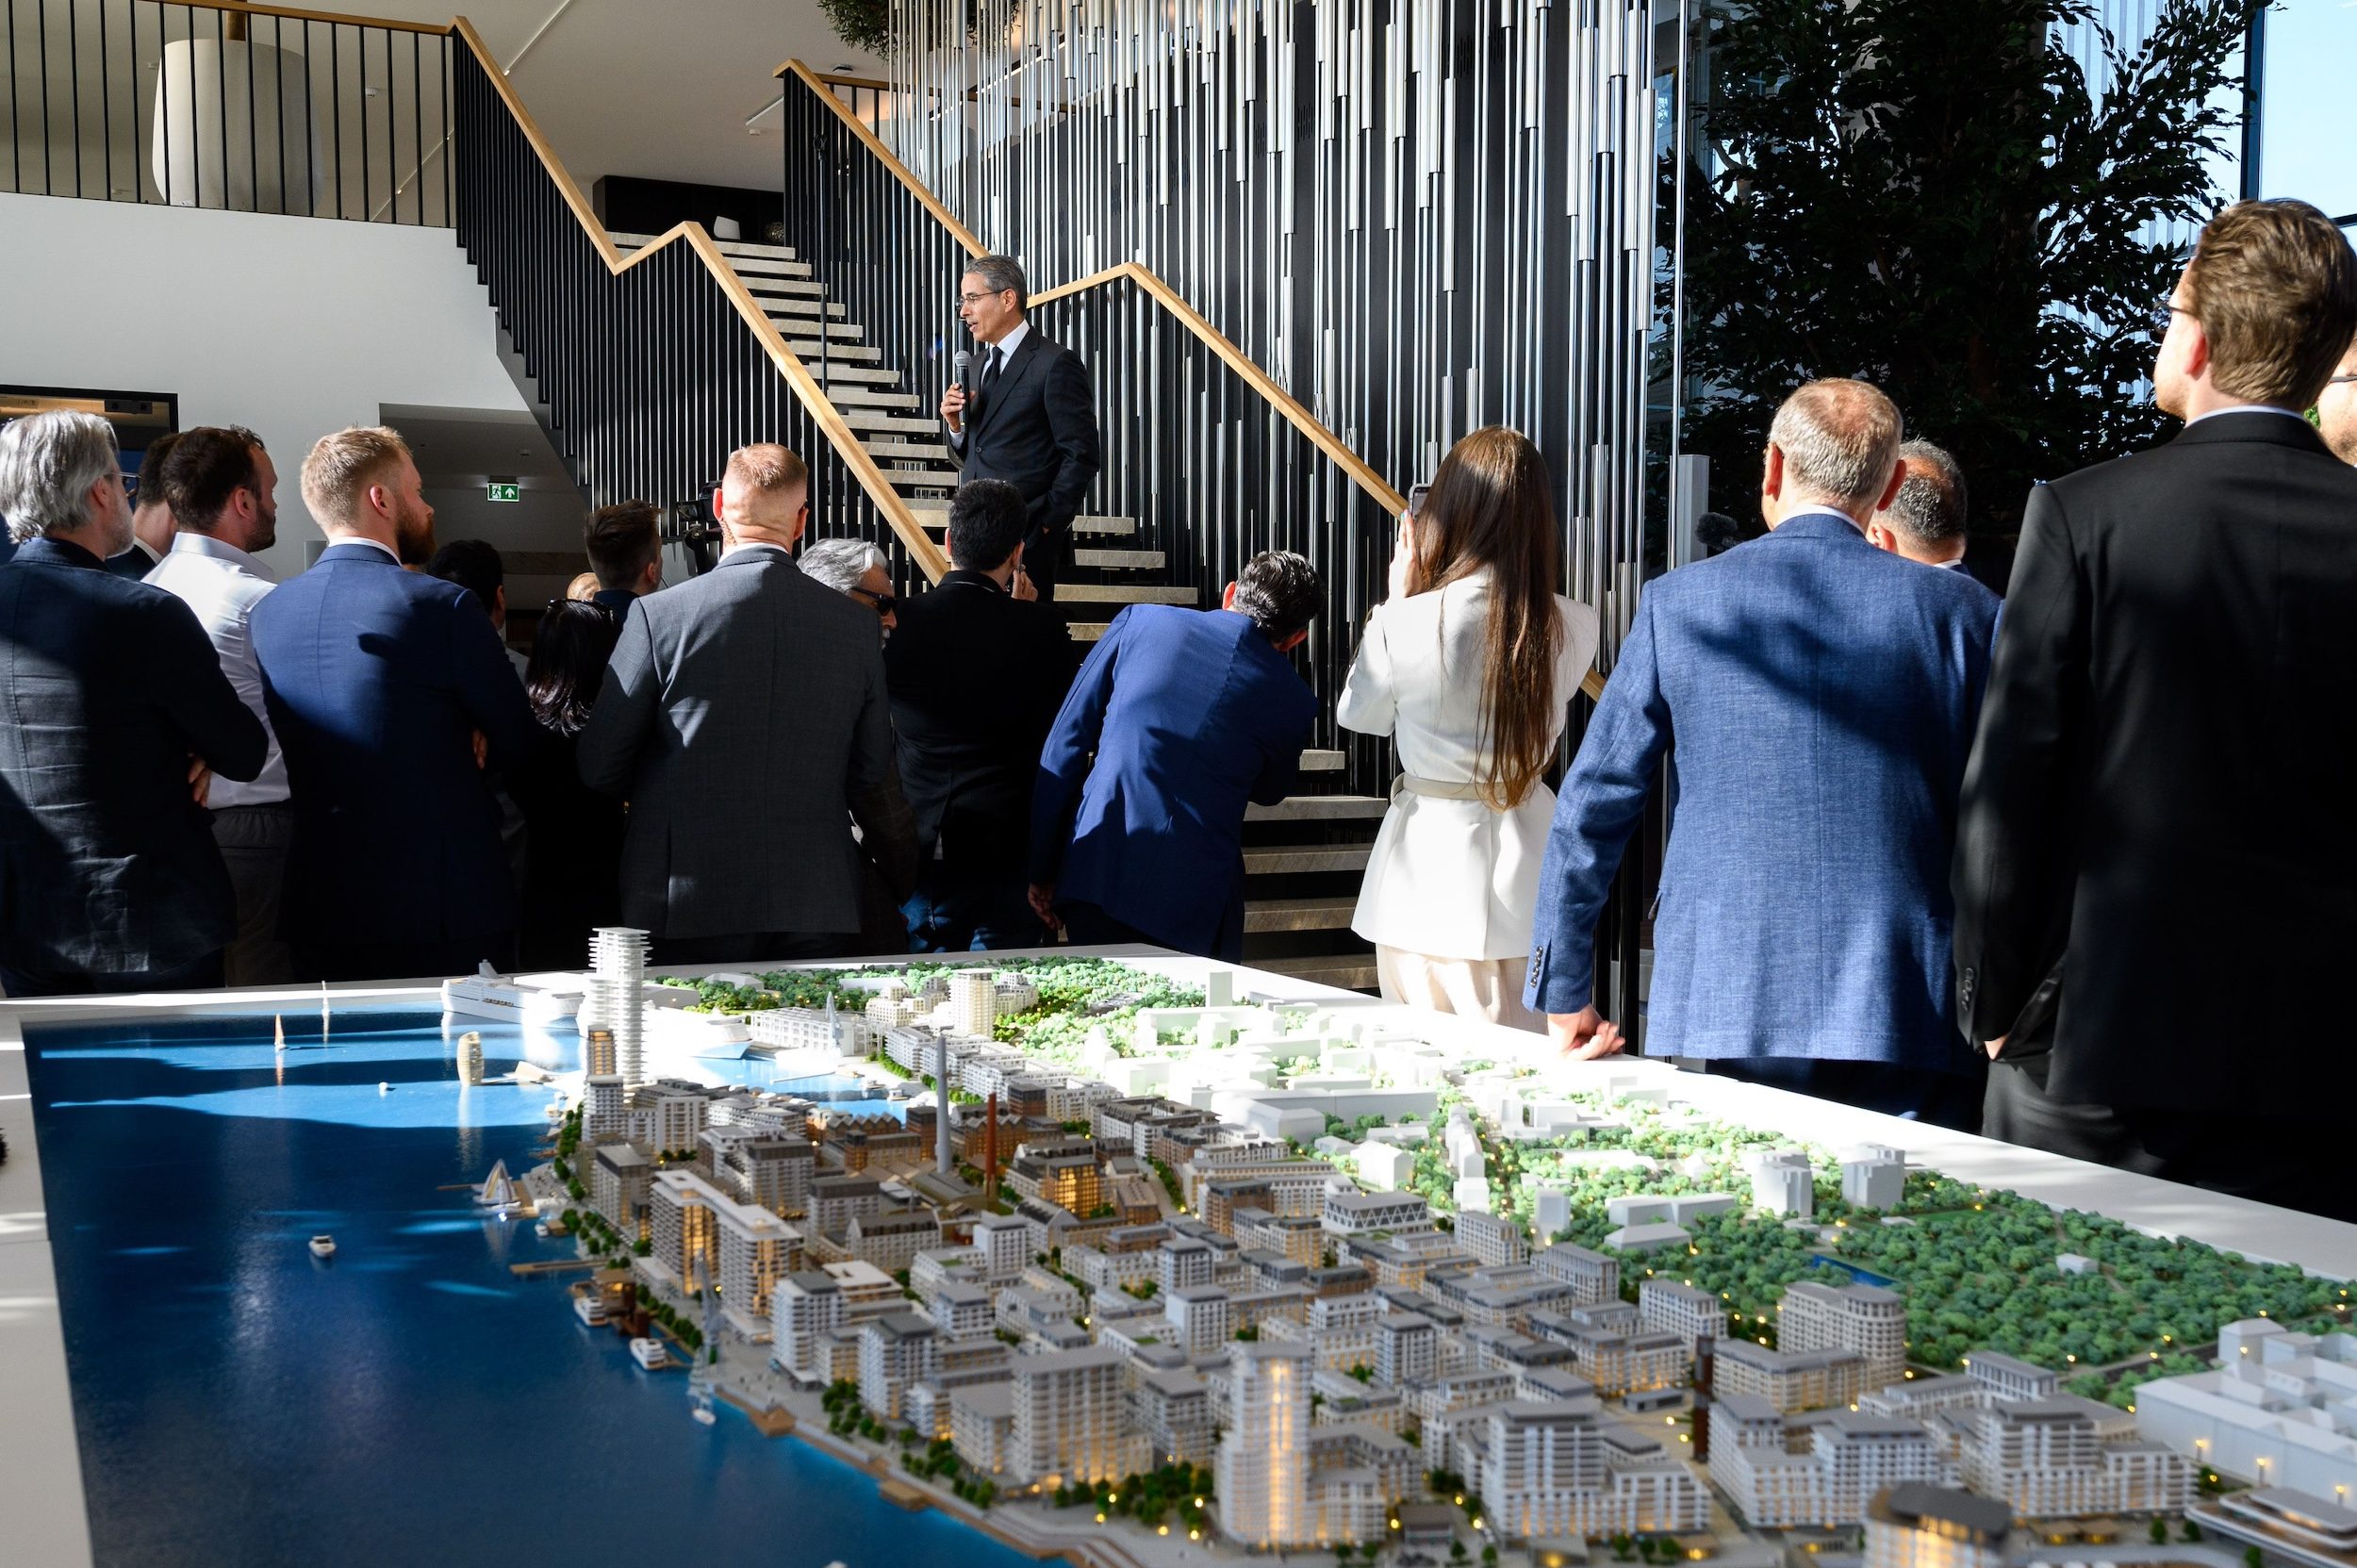 Cafeteria, Indoors, Restaurant Mohamed Alabbar, founder and chairman of Eagle Hills Properties, announced the launch of Riga Waterfront on Thursday